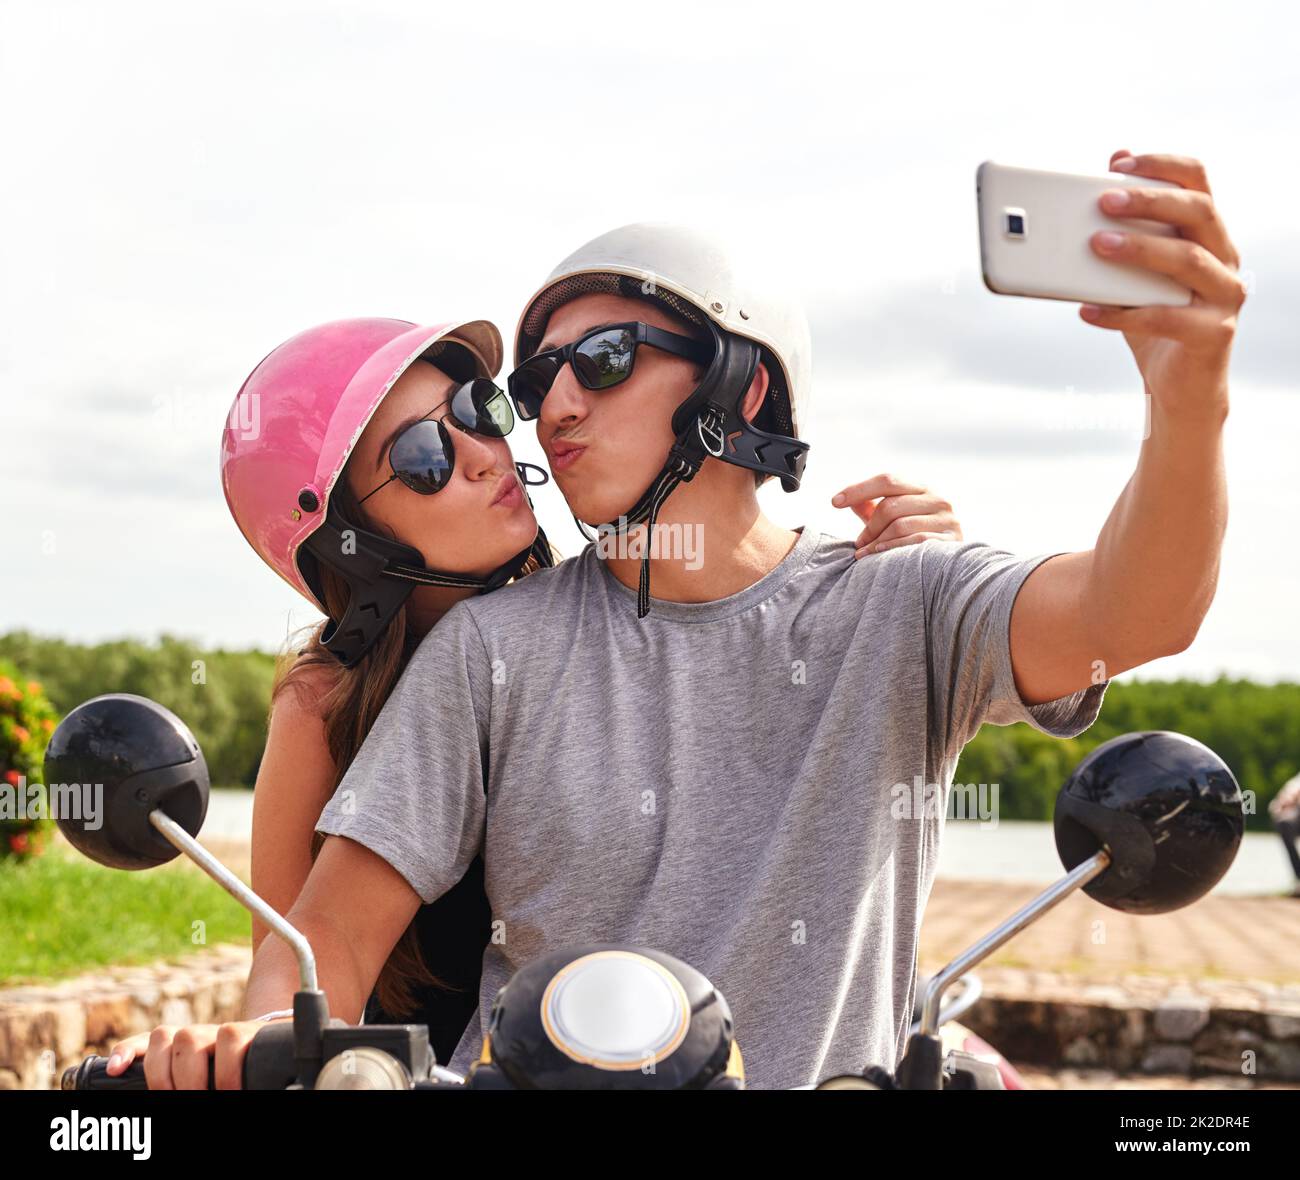 Making memories on the road. Shot of a young couple taking a selfie together while out for a ride on a scooter. Stock Photo